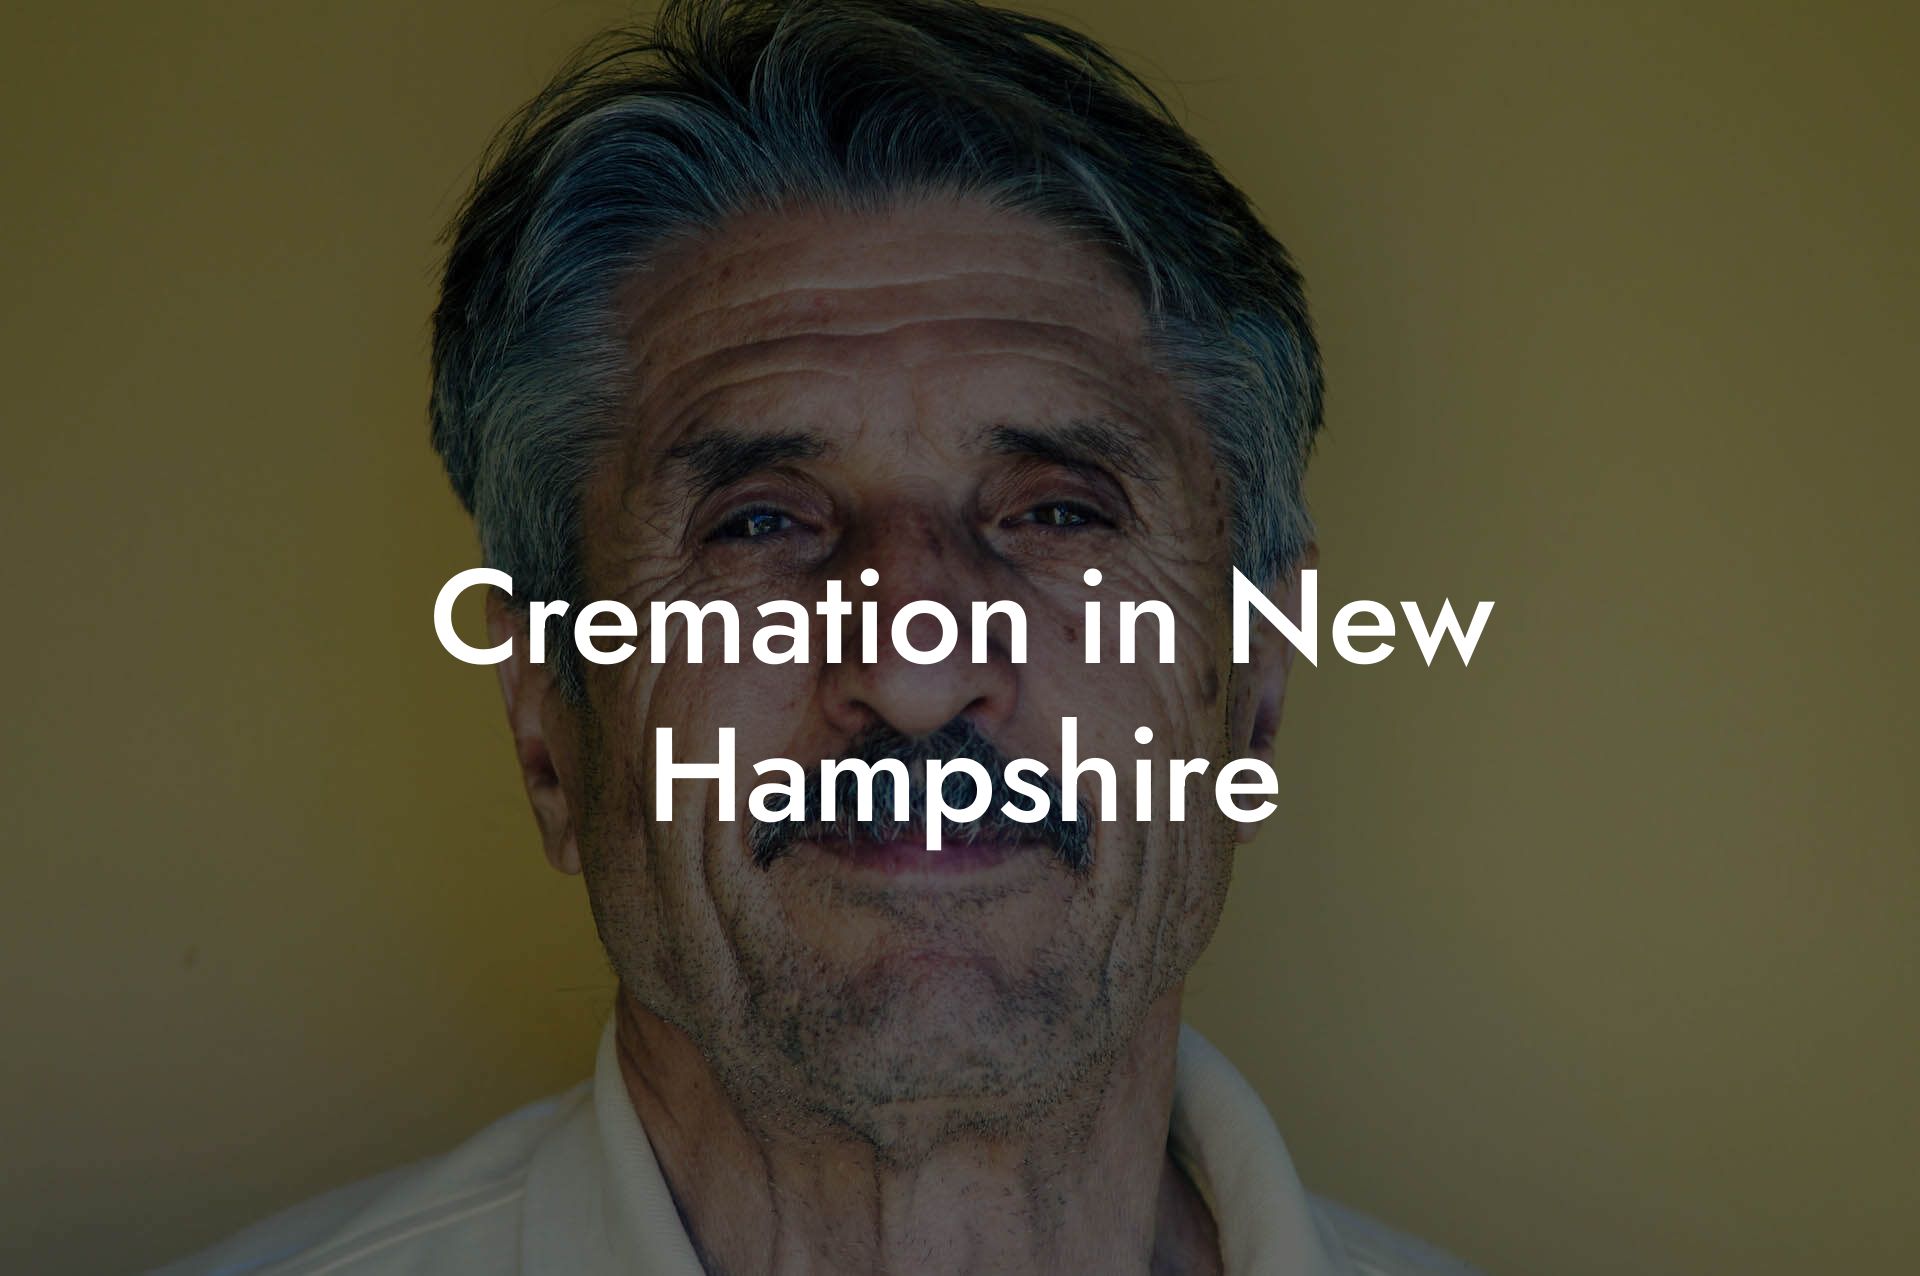 Cremation in New Hampshire